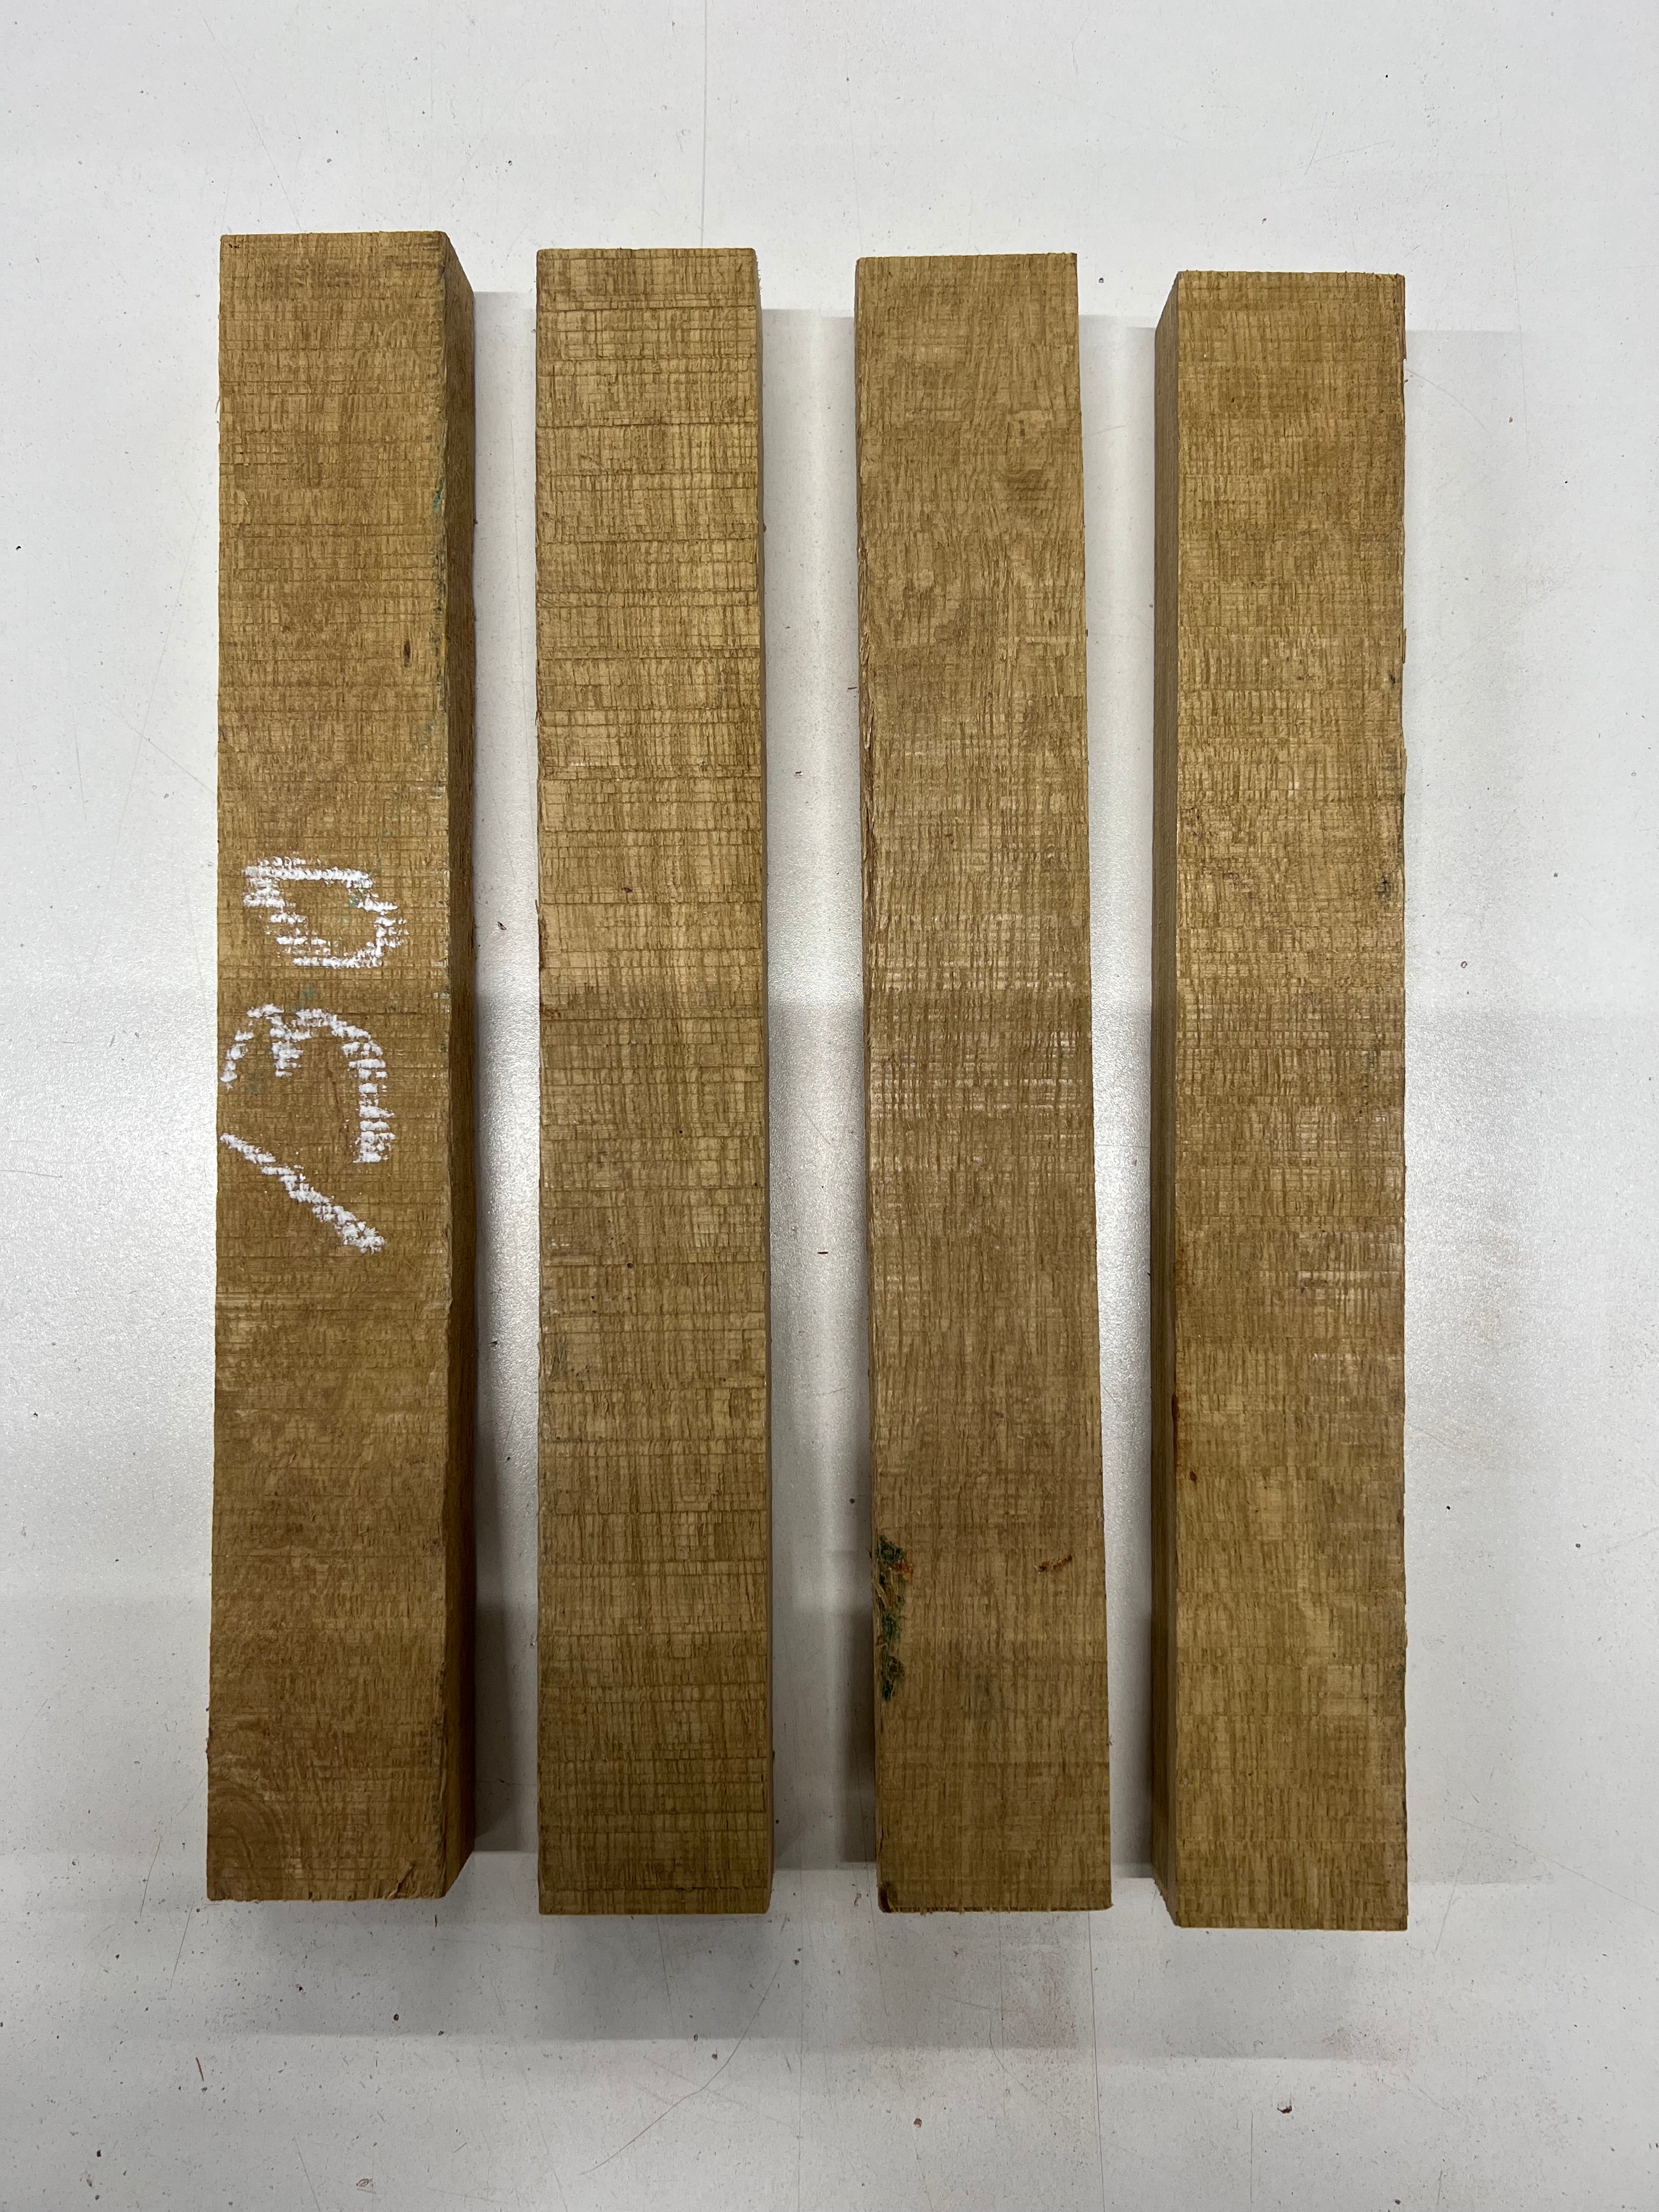 Pack of 4, White Limba Thin Stock Three-Dimensional Lumber Board Wood Blanks 12&quot; x 1-5/8&quot; x 1&quot; 